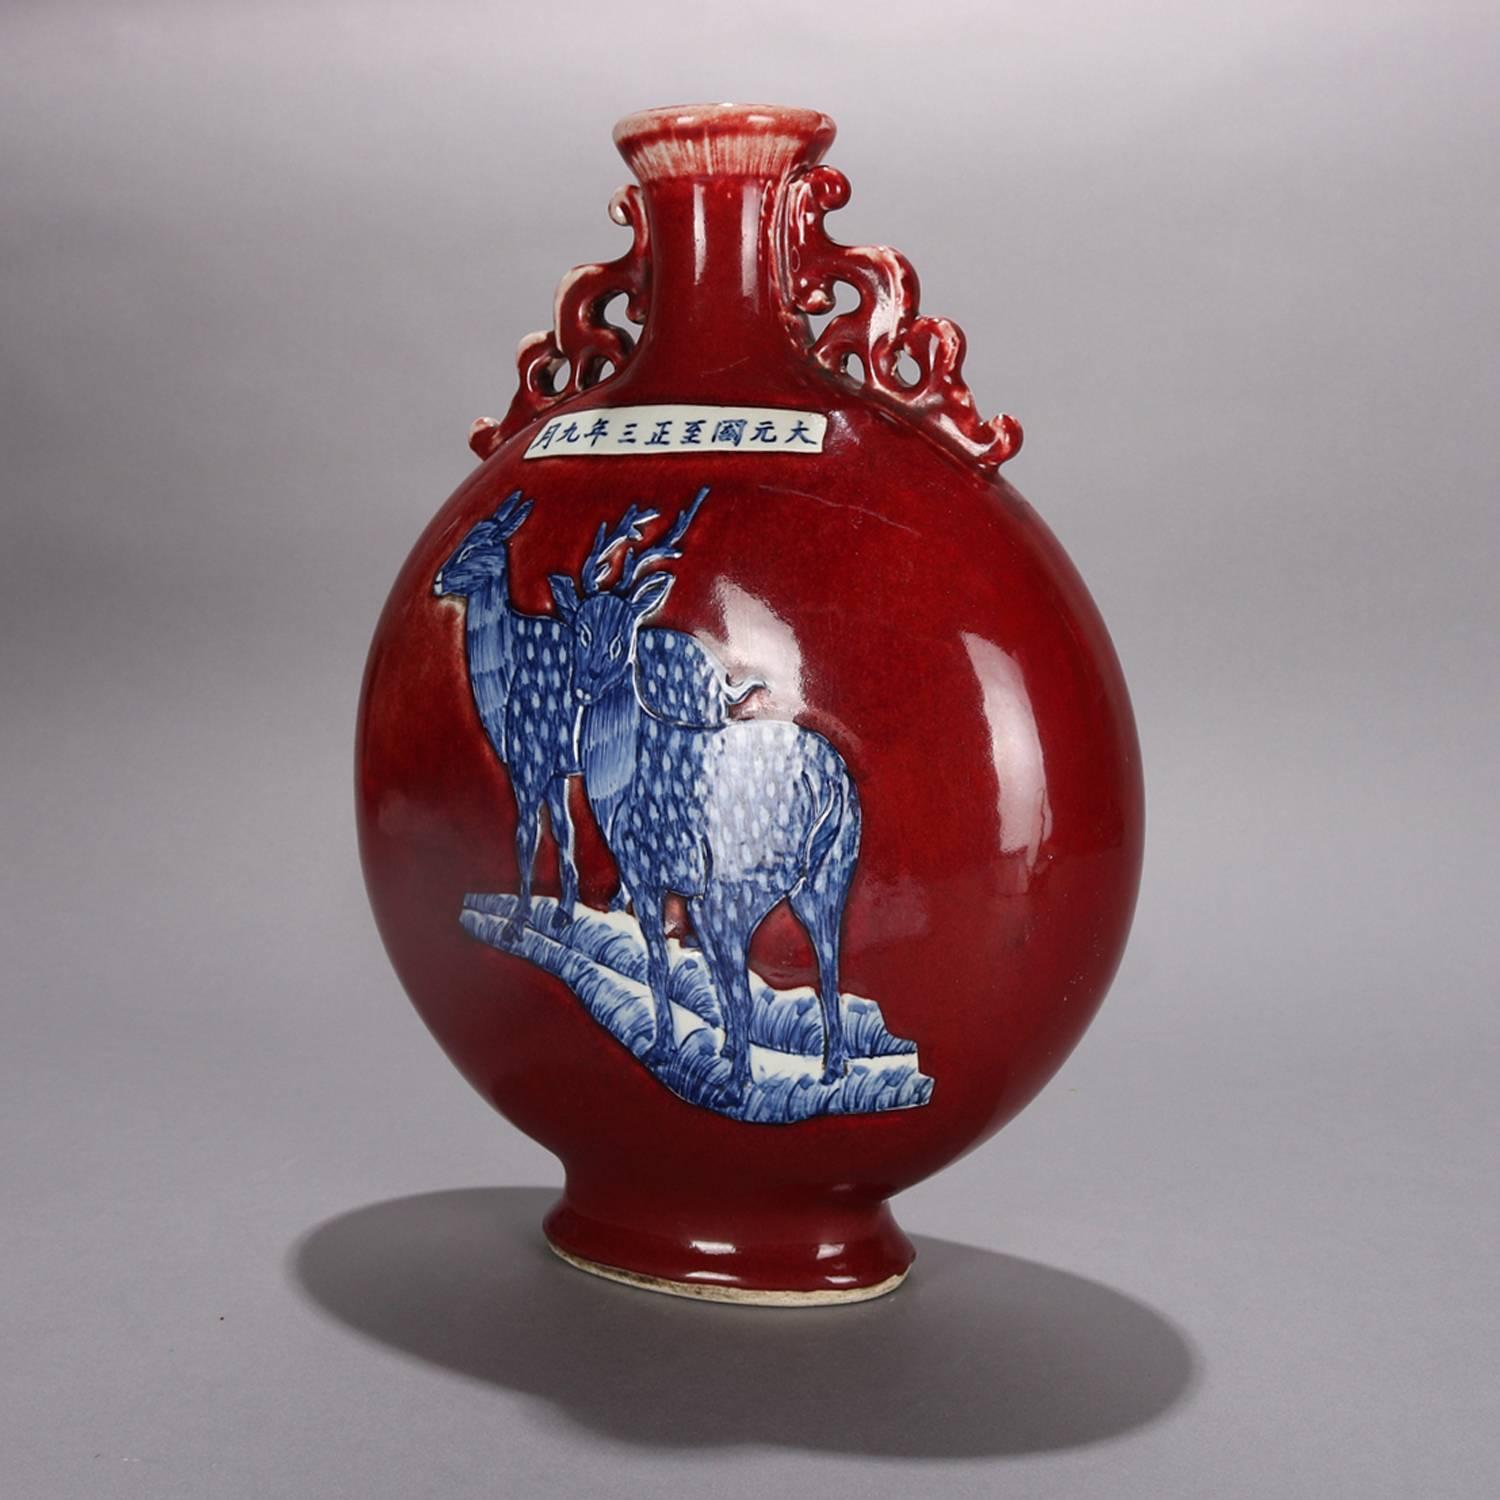 Chinese hand-painted flask vase features moon form with oxblood red glazing, double scrolled handles and central reserve with deer with chope mark titling above, 20th century

Measures: 14.25